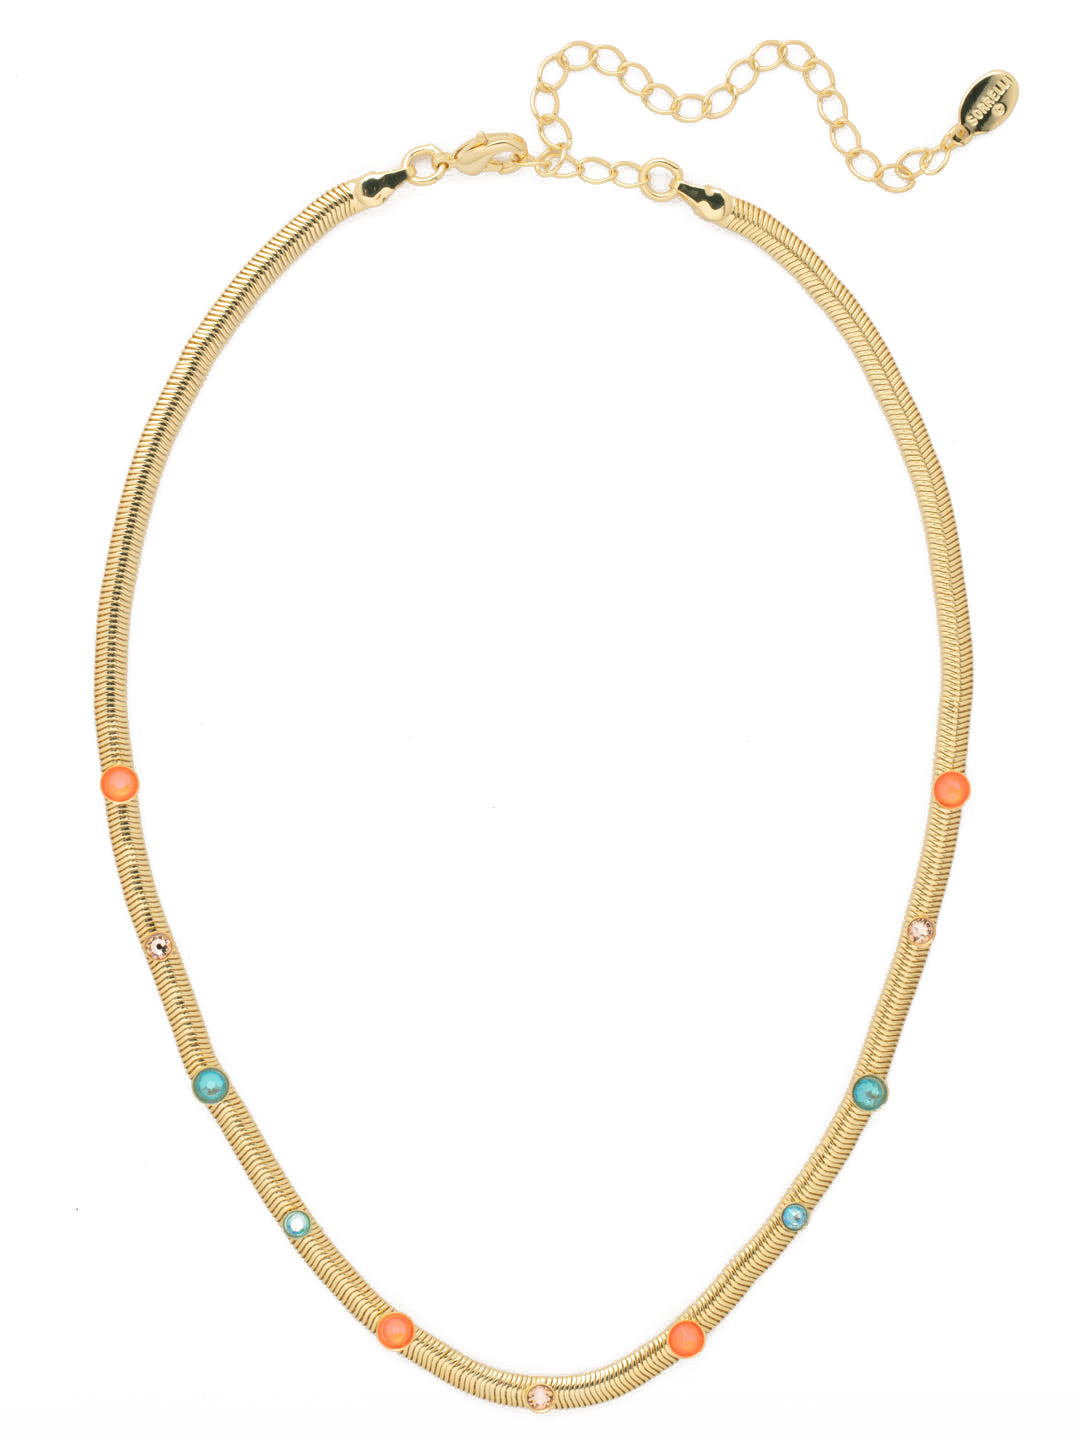 Mini Studded Juna Tennis Necklace - NFM35BGPRT - <p>The Mini Studded Juna Tennis Necklace features the classic mini snake chain lined with round crystal studs along the chain, adjustable and secured with a lobster claw clasp. From Sorrelli's Portofino collection in our Bright Gold-tone finish.</p>